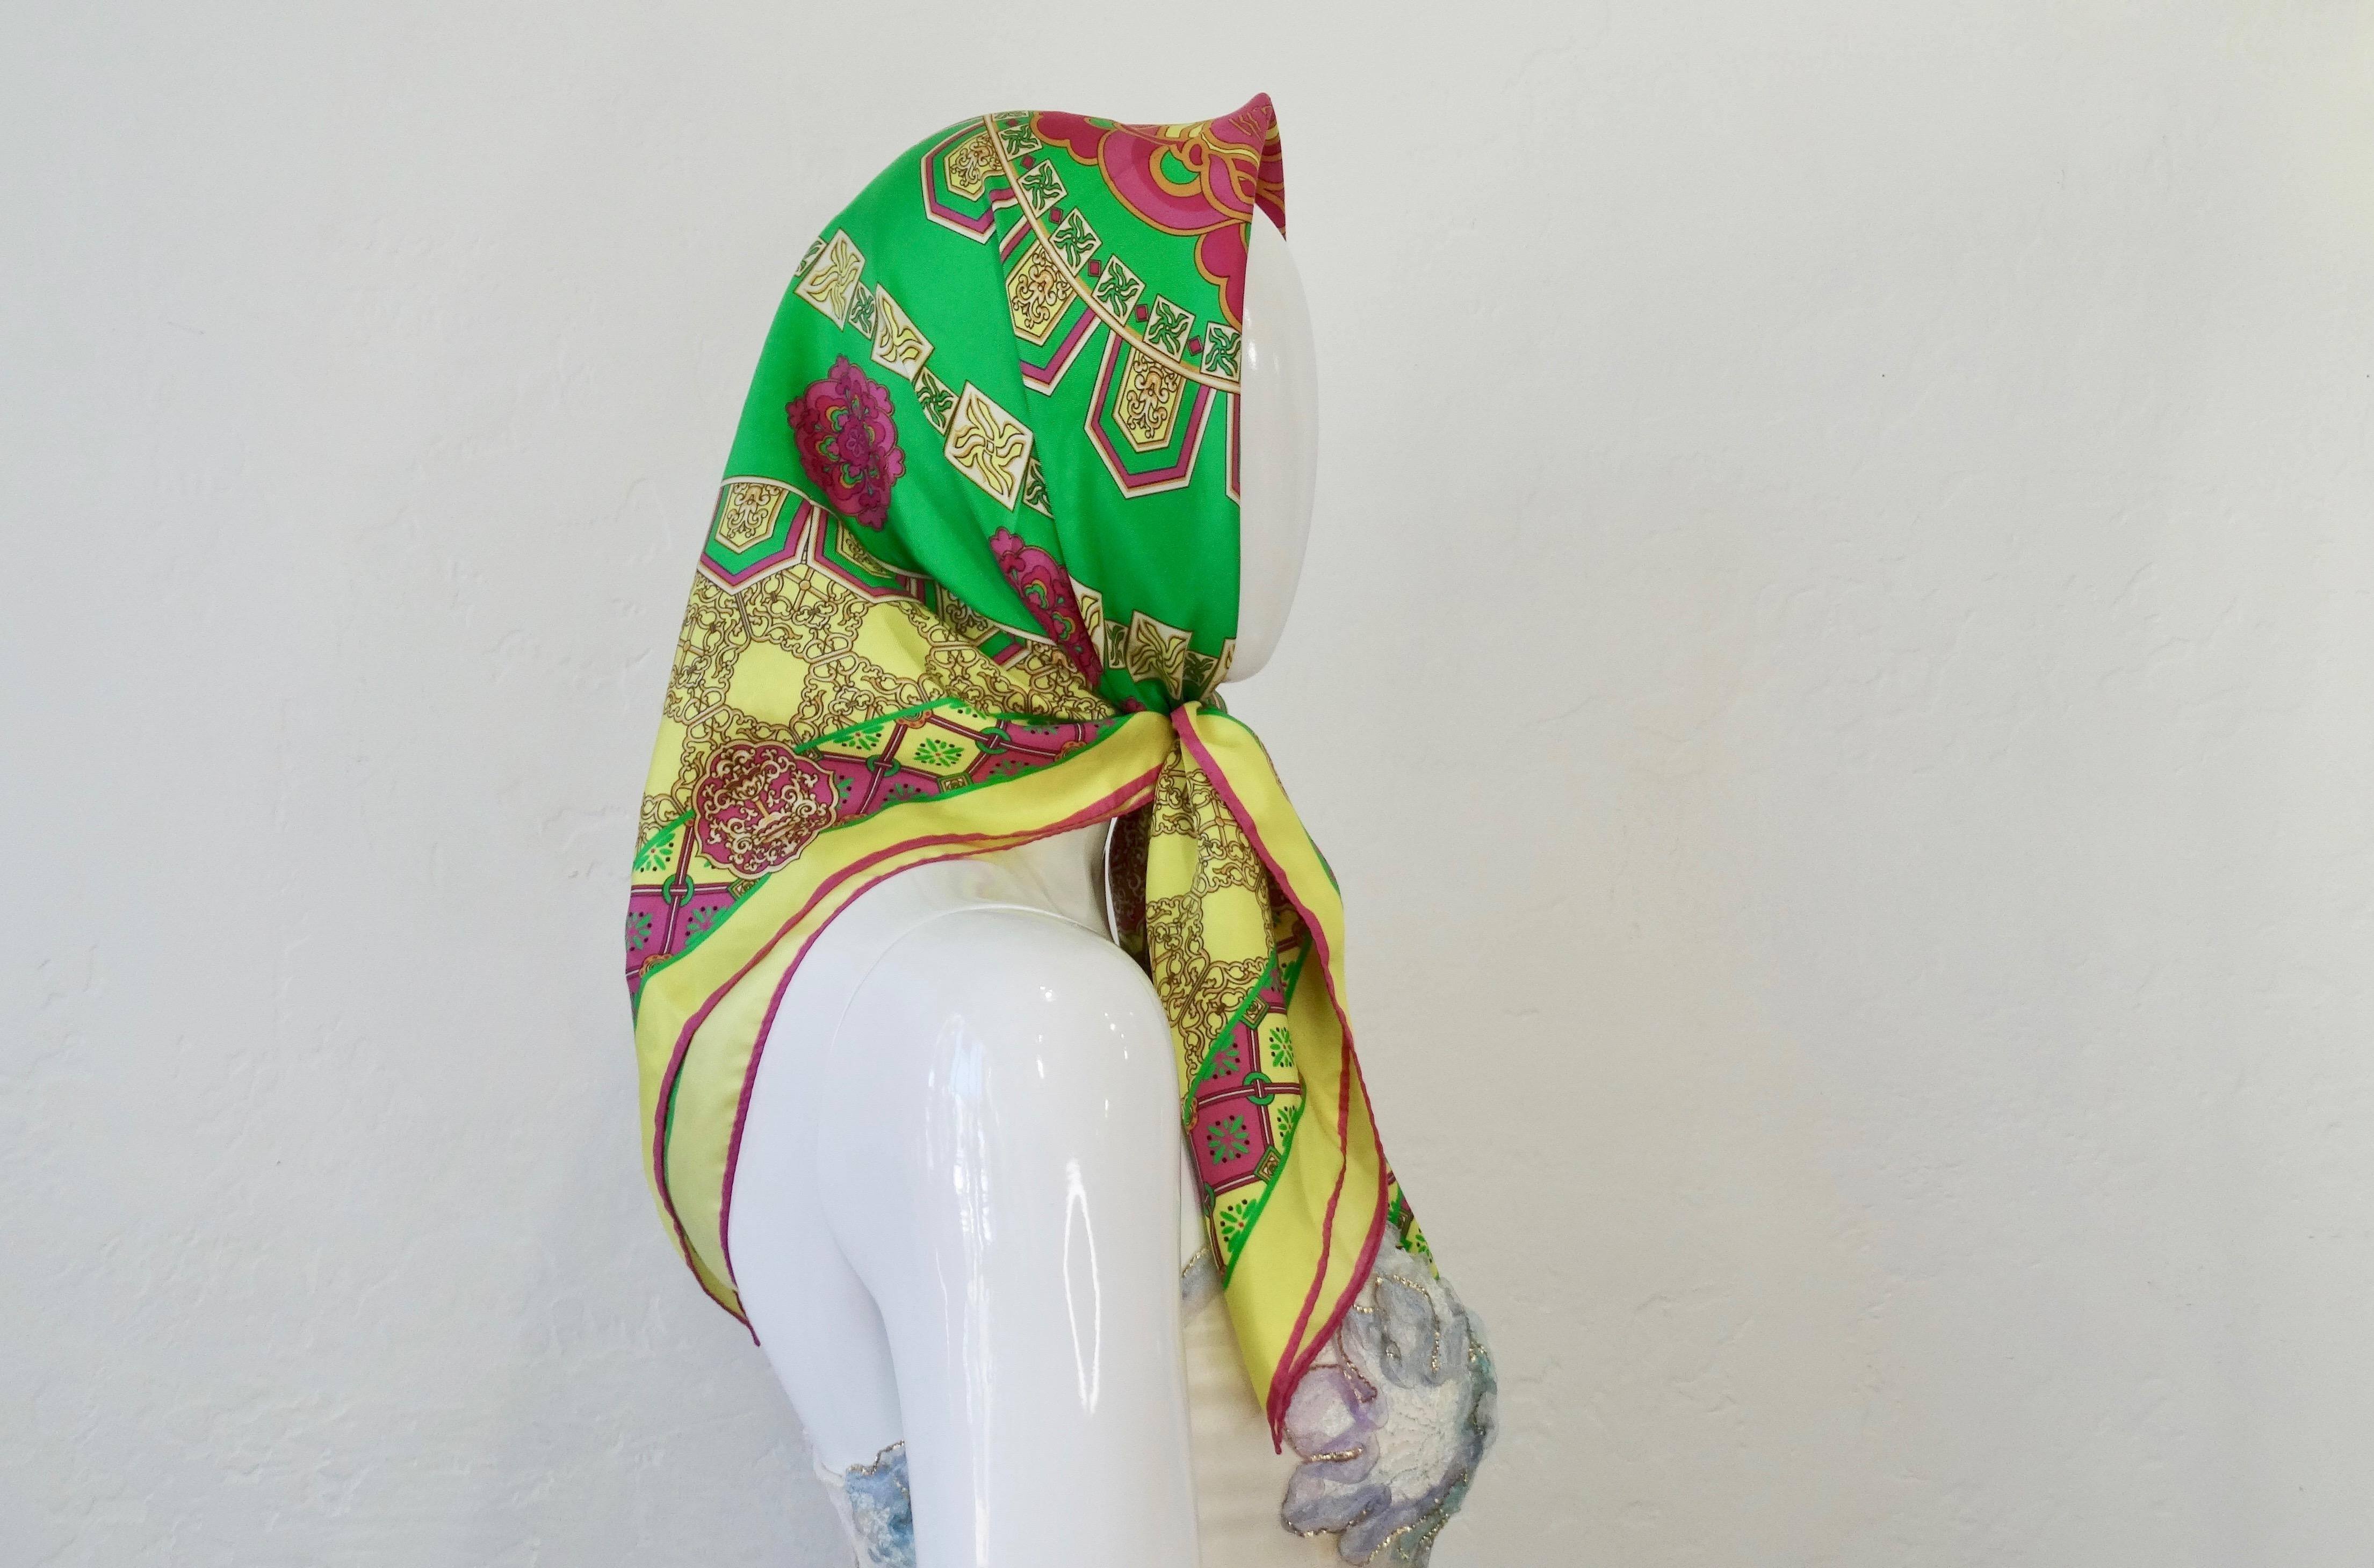 Add some color to your scarf collection with this amazing Versace scarf! Circa recent 2000s, this Silk scarf features a bright neon multi-colored motif with various intricate decorative designs surrounding the signature Versace Medusa. Signed